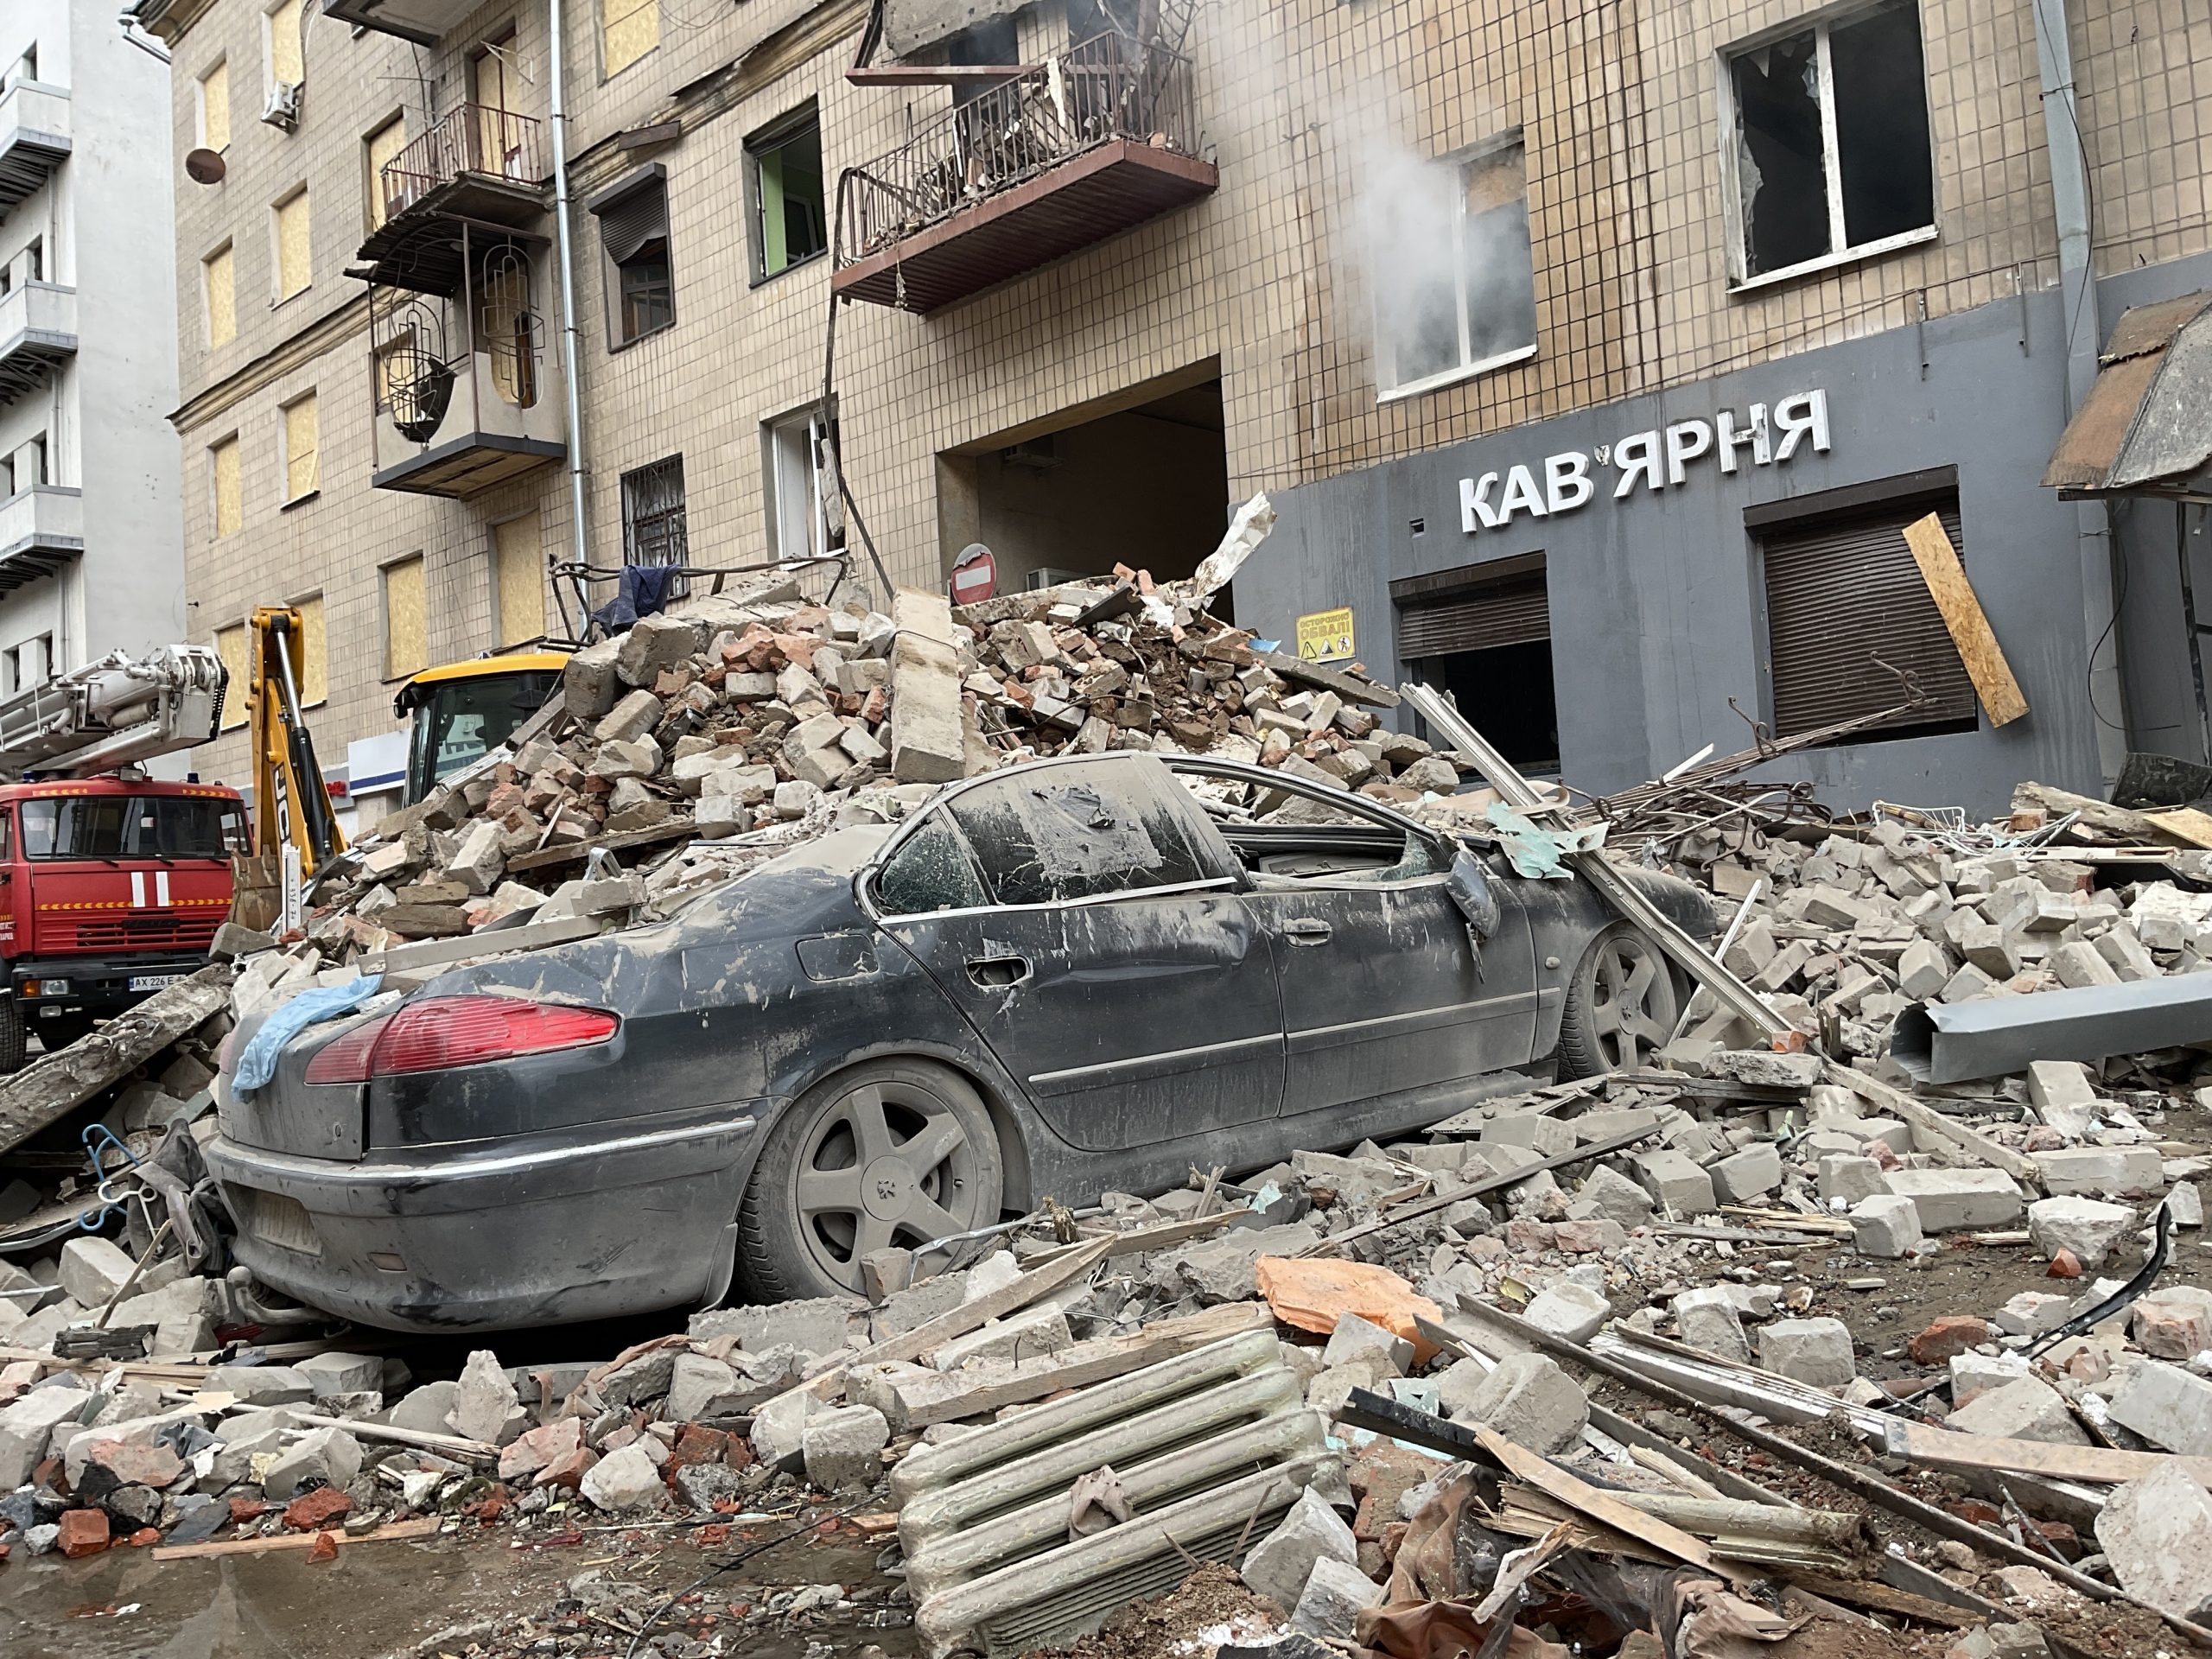 Kharkiv, Svobody Street, results of the S-300 attack. Photo was taken on Sep 06, 2022 by Oleksiy Svid.